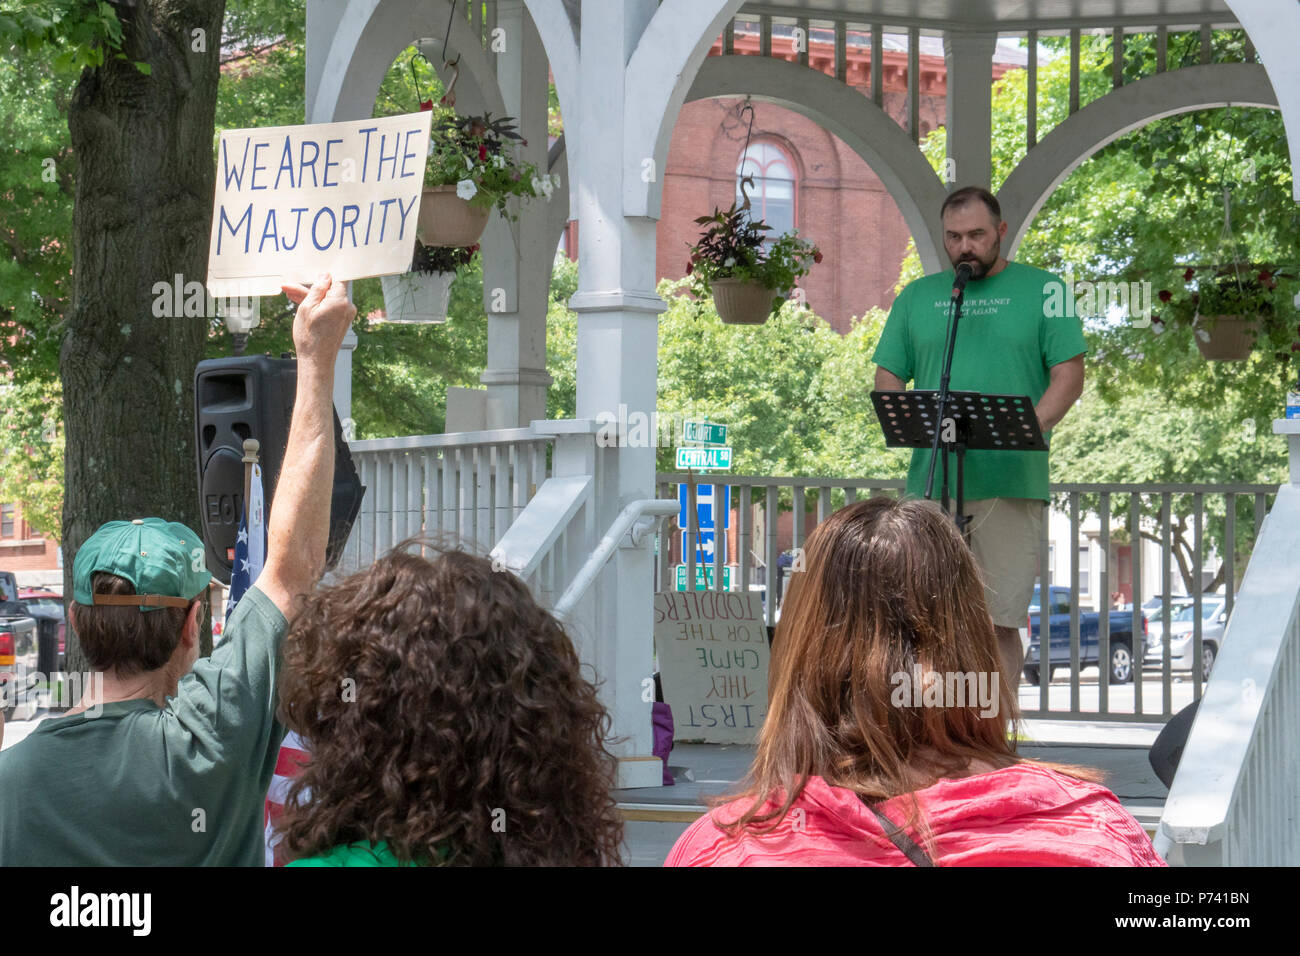 KEENE, NEW HAMPSHIRE/US - June 30 2018: Protesters hold signs at a rally protesting the immigration policies of the Trump administration. Stock Photo